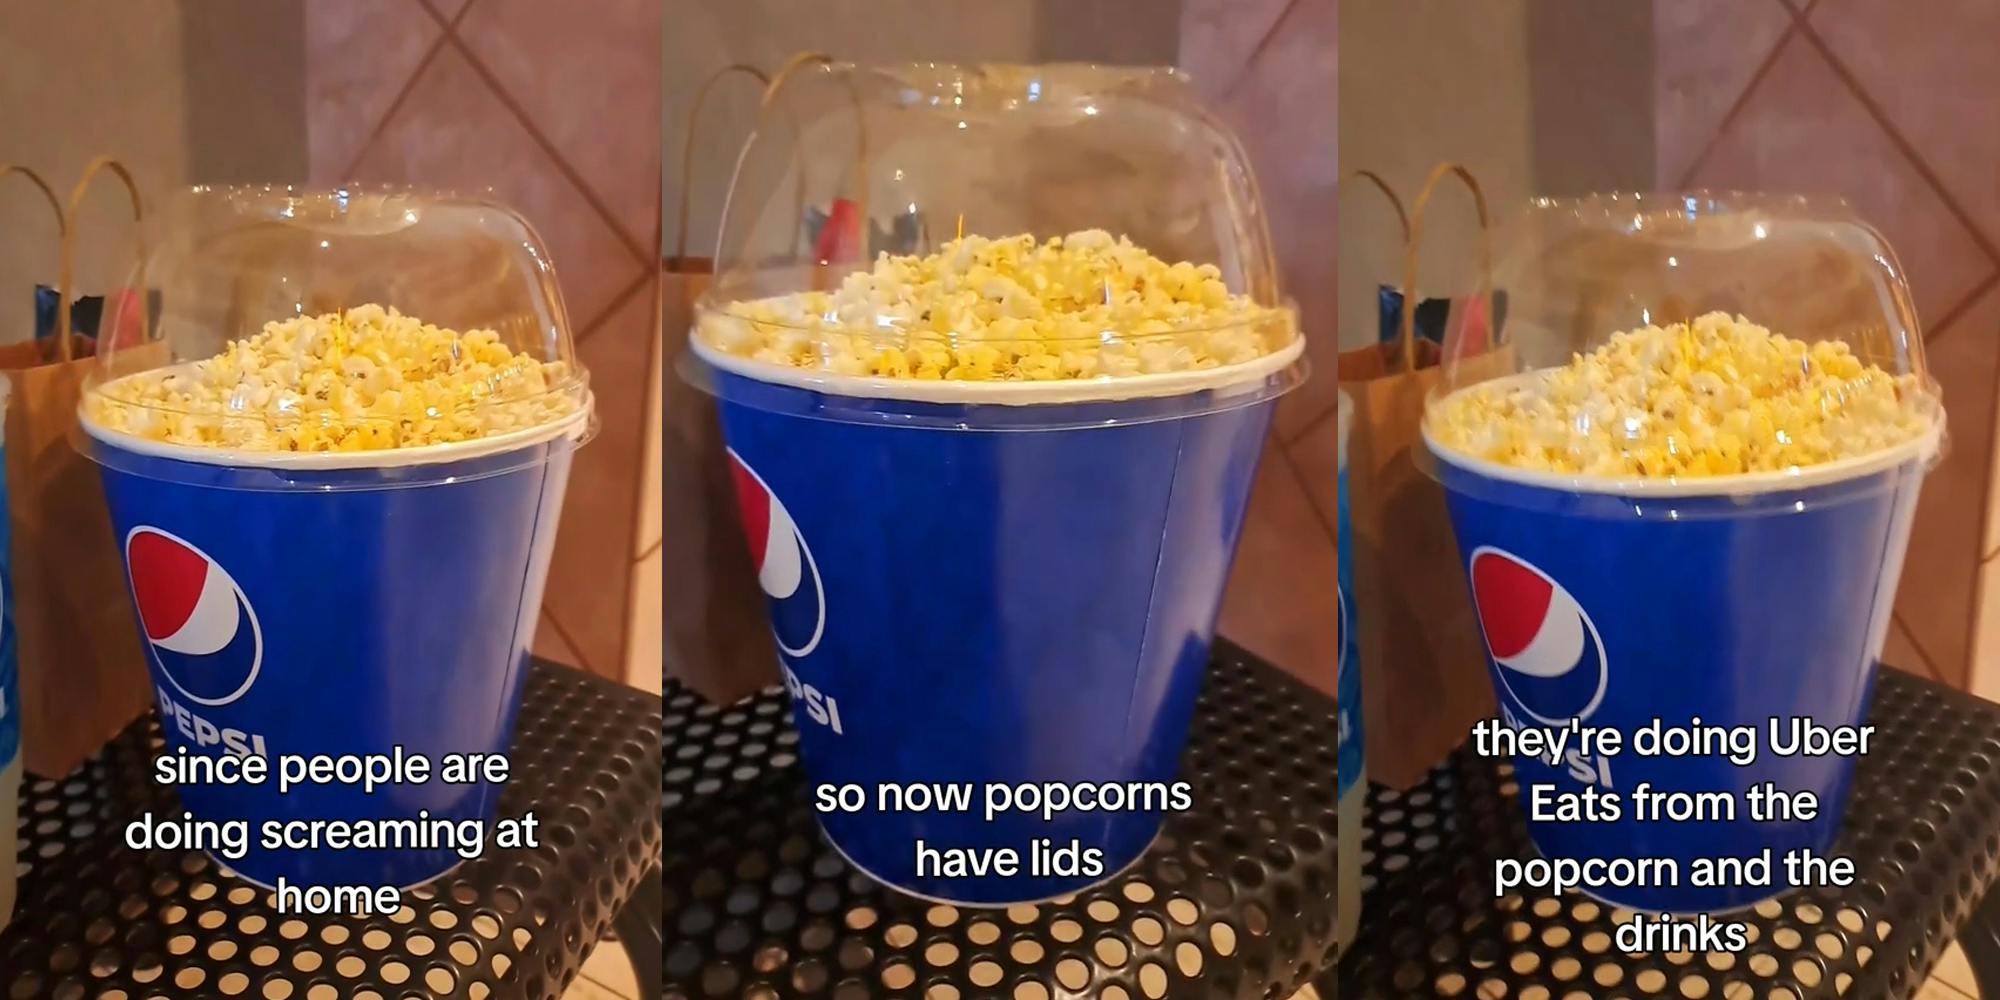 movie theater popcorn container filled with lid on top with caption "since people are doing screaming at home" (l) movie theater popcorn container filled with lid on top with caption "so now popcorns have lids" (c) movie theater popcorn container filled with lid on top with caption "They're doing Uber Eats from the popcorn and the drinks" (r)